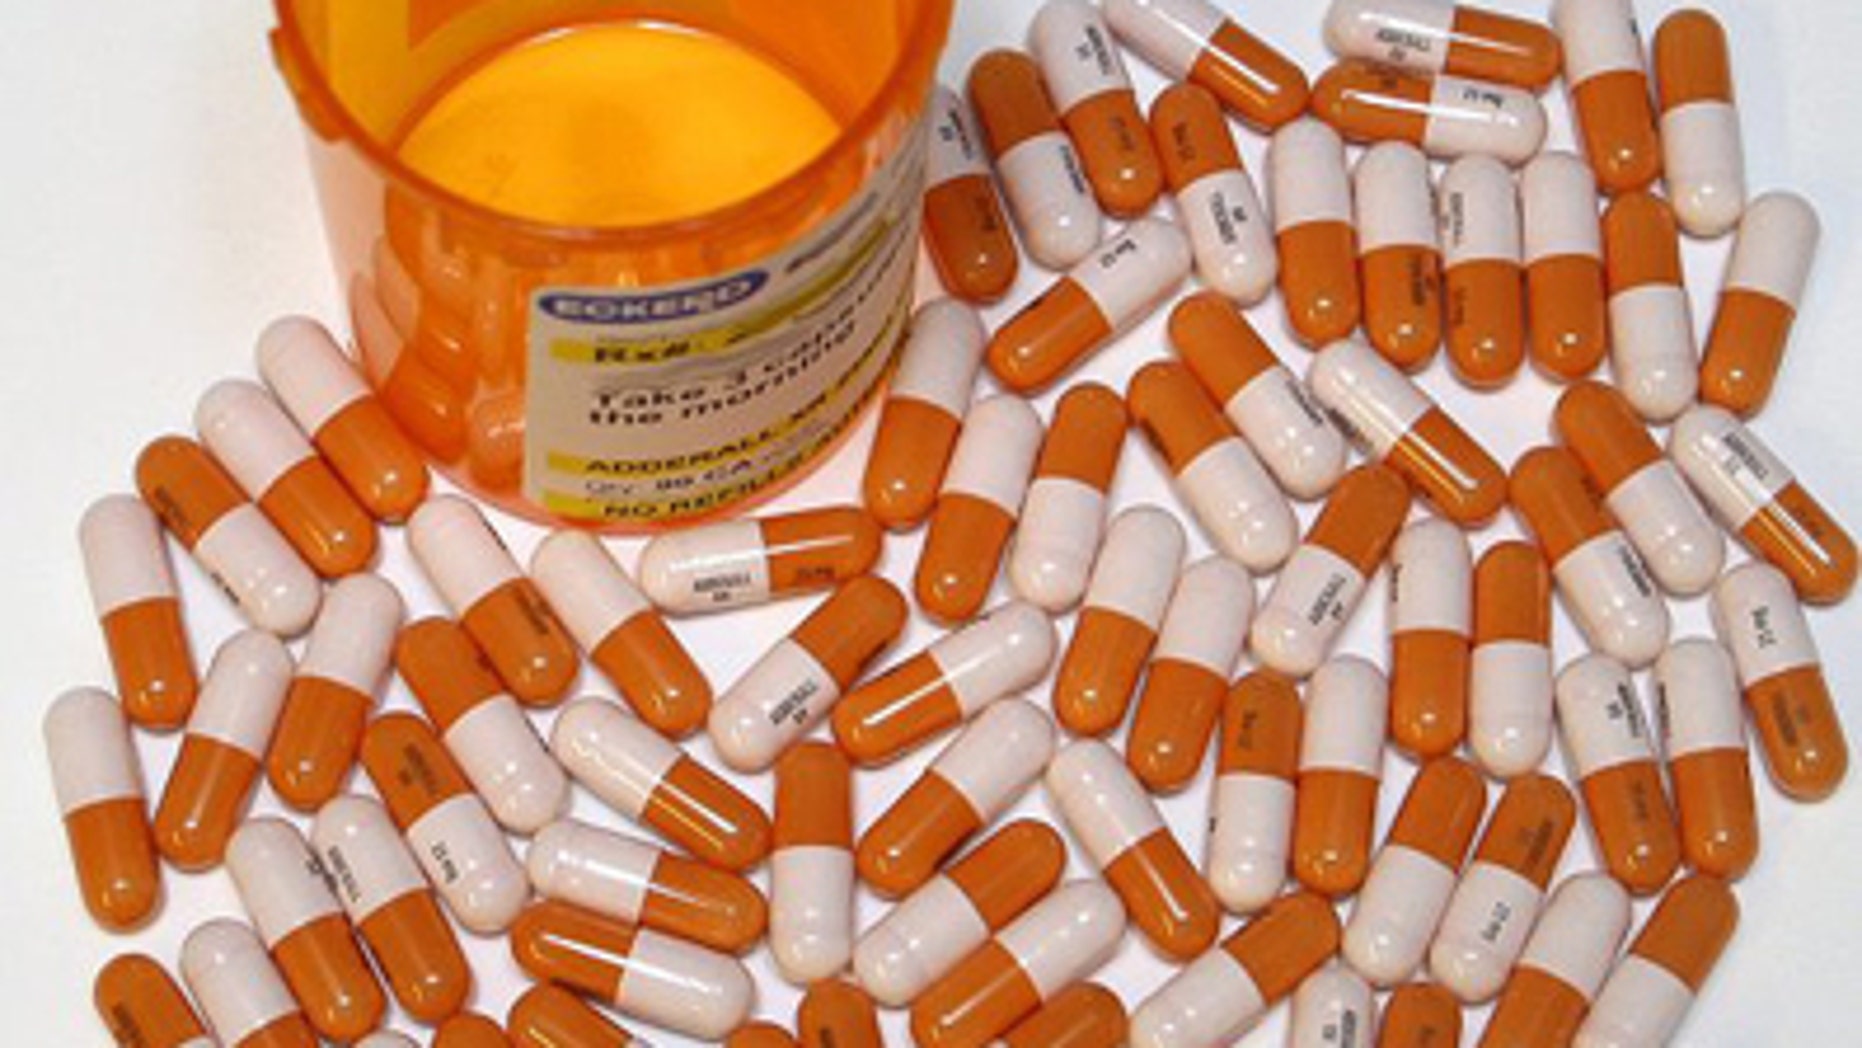 ritalin-adderall-shortages-leave-adhd-patients-hunting-for-options